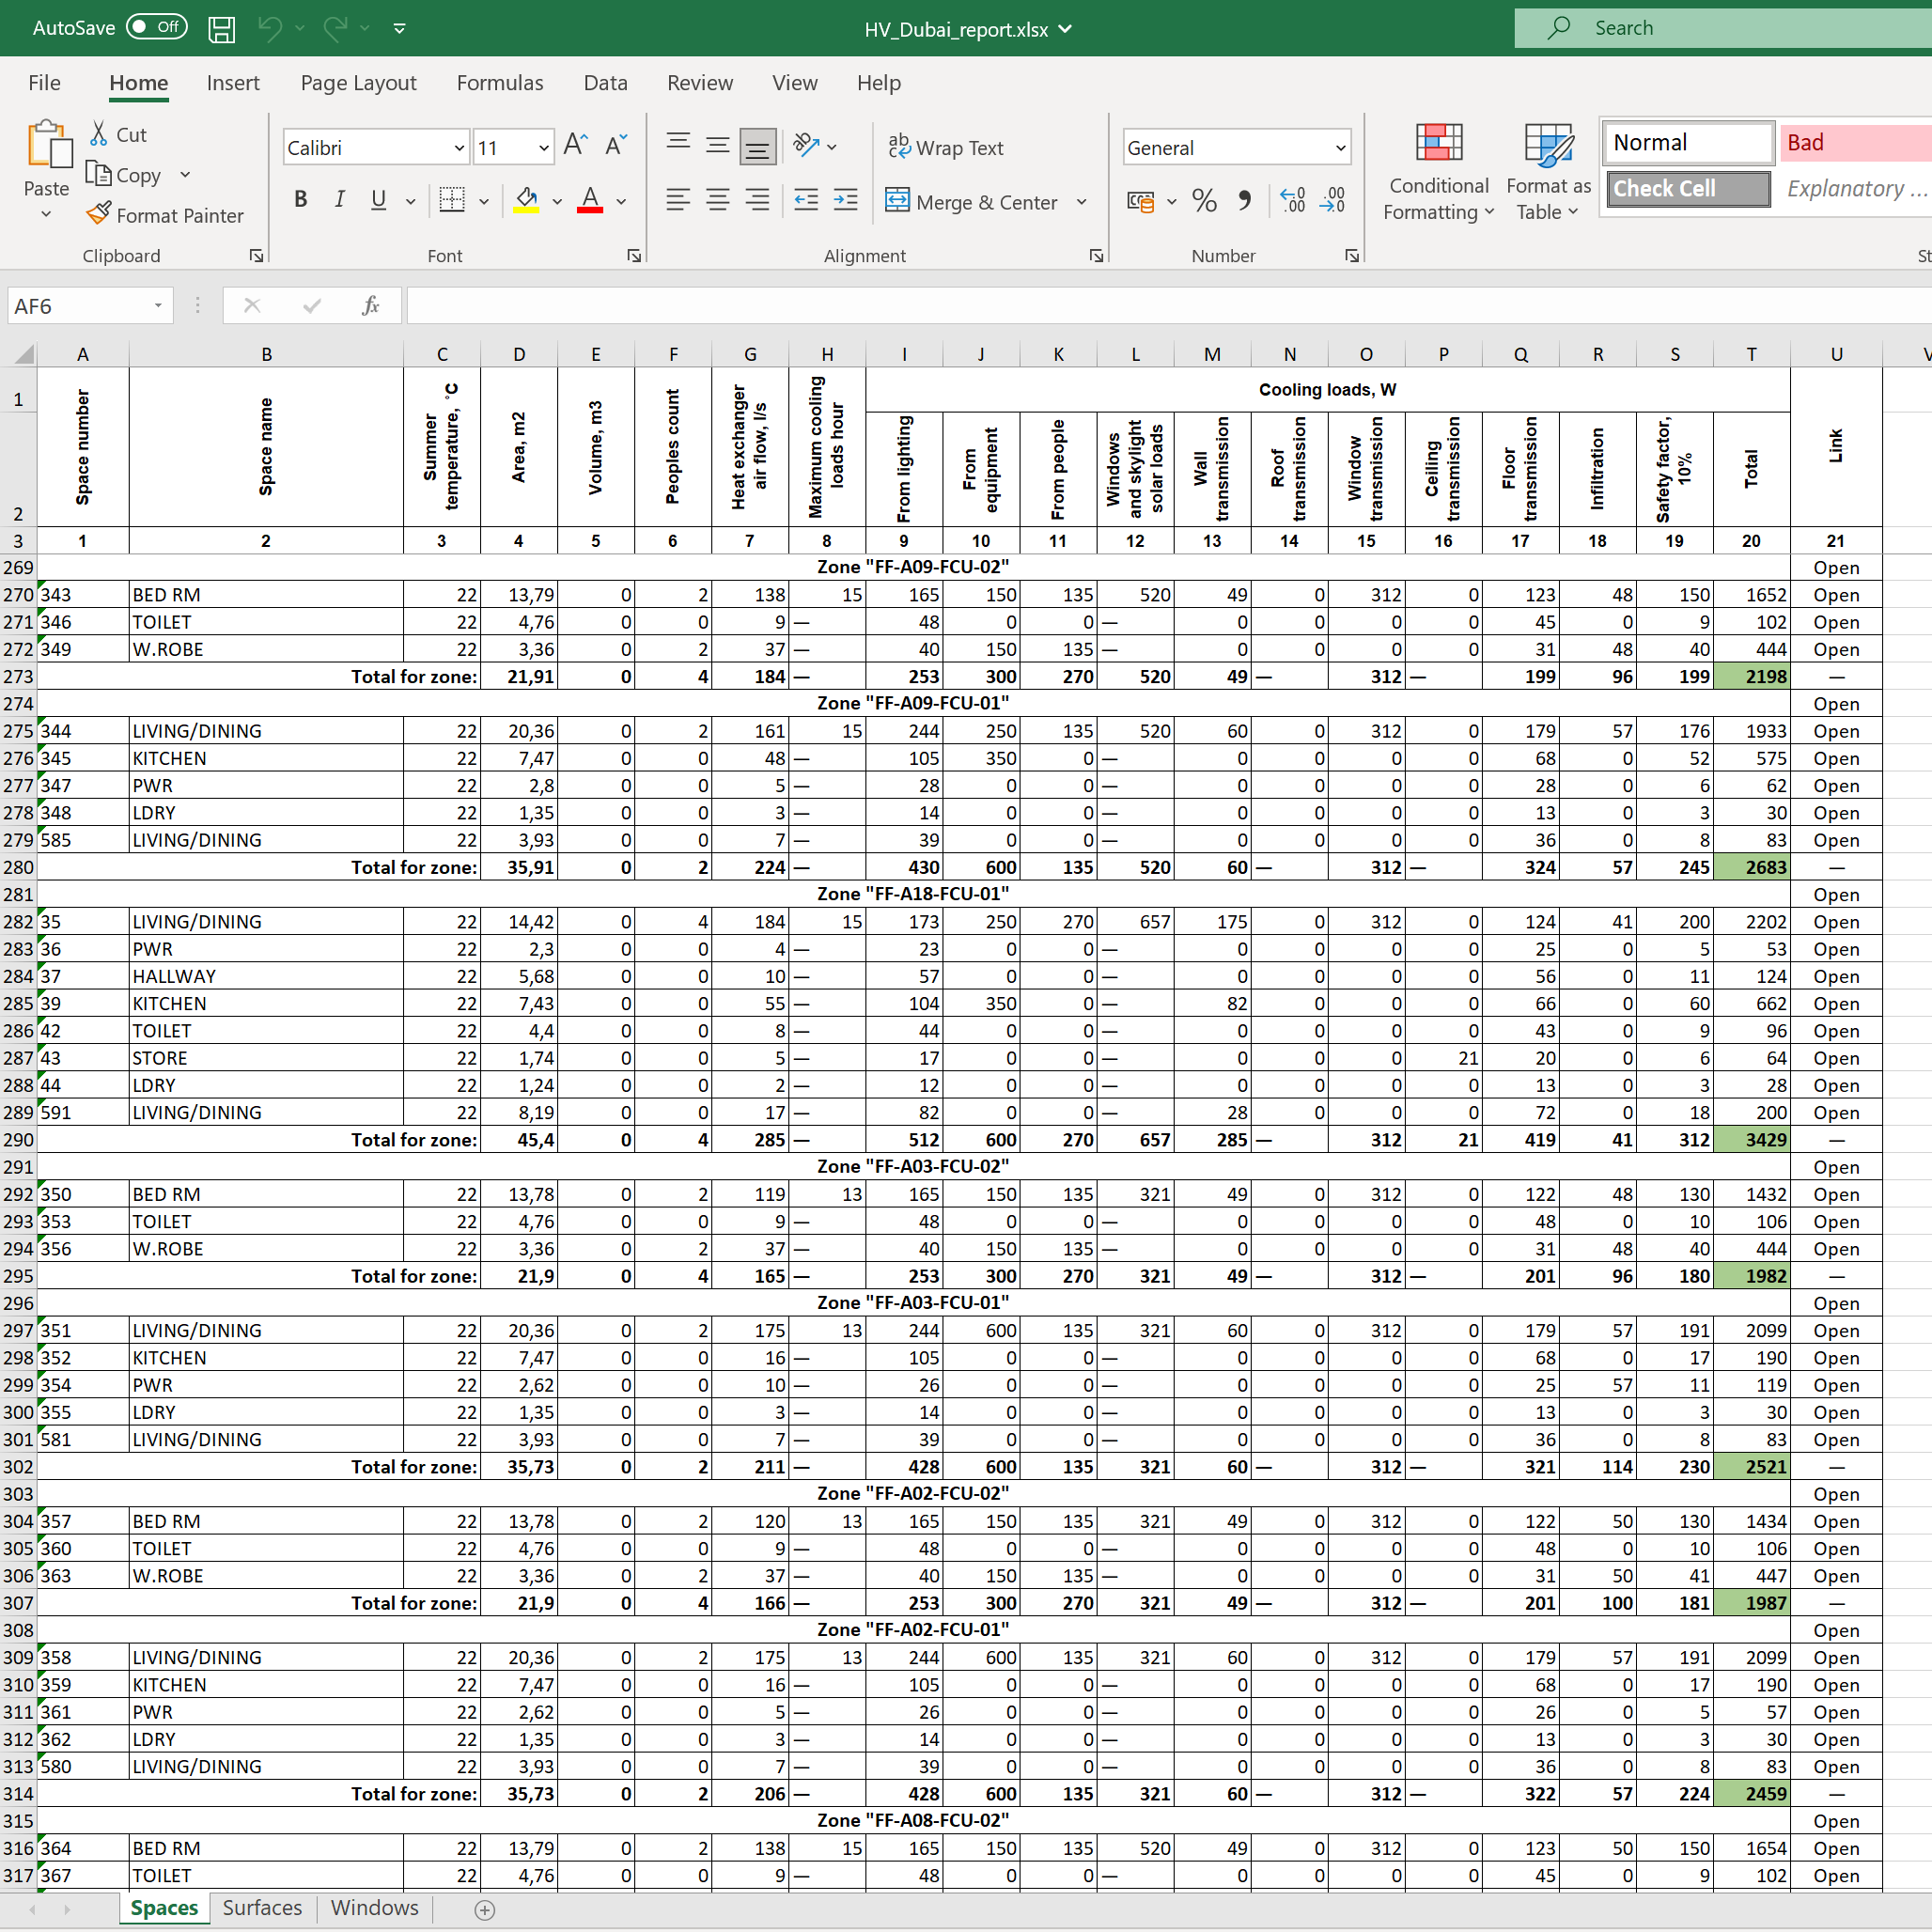 Get a detailed Excel report on cooling loads of the building and air-conditioning systems.